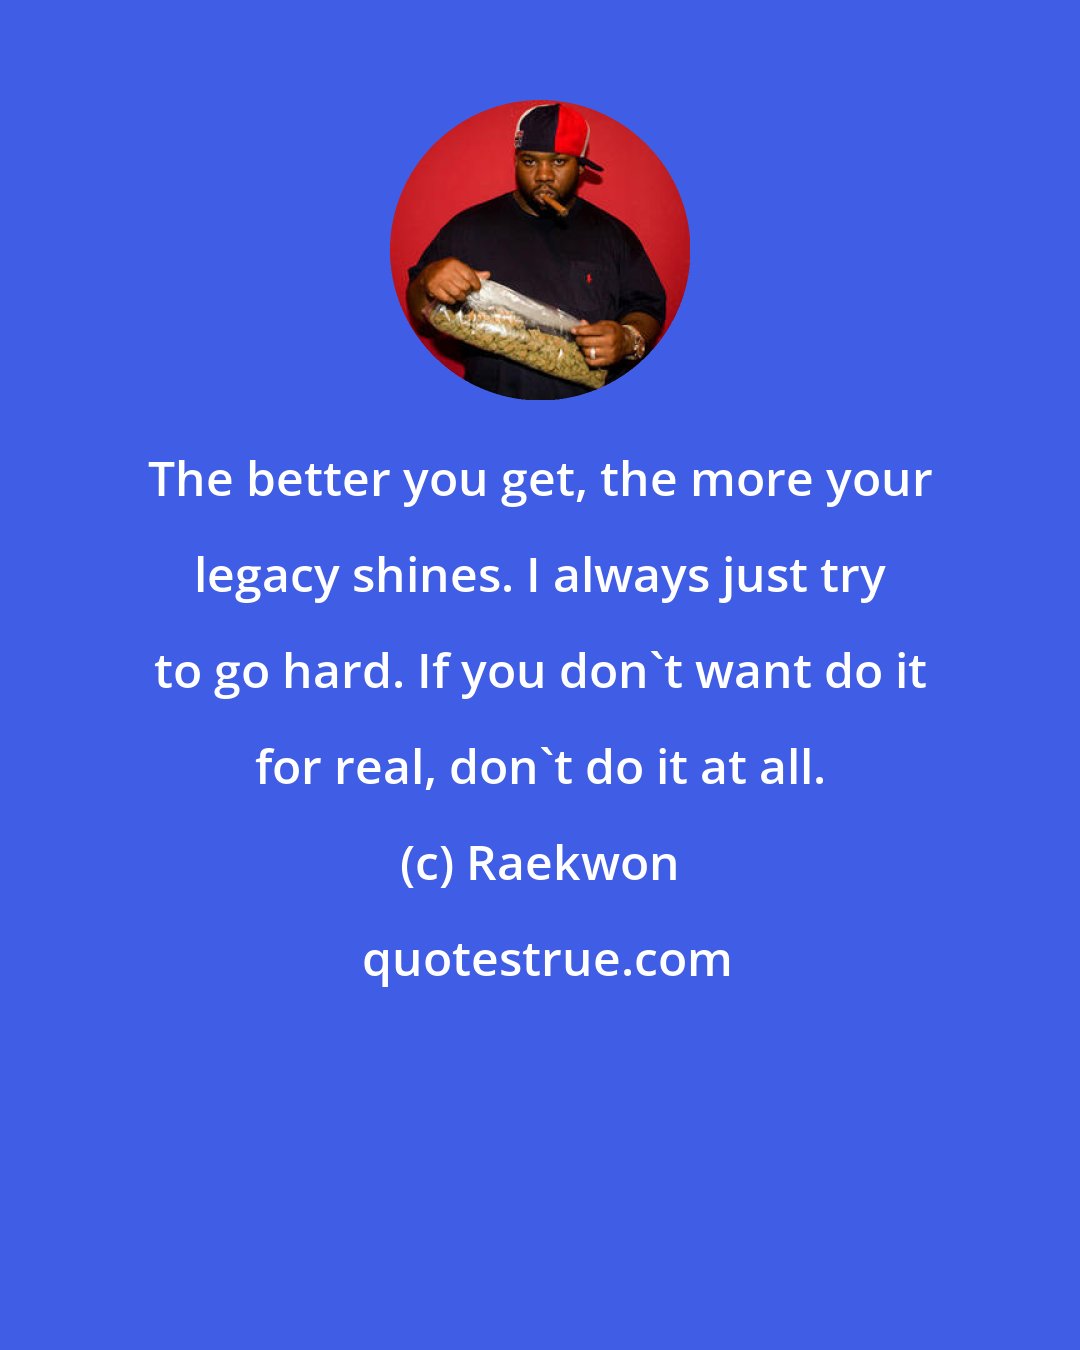 Raekwon: The better you get, the more your legacy shines. I always just try to go hard. If you don't want do it for real, don't do it at all.